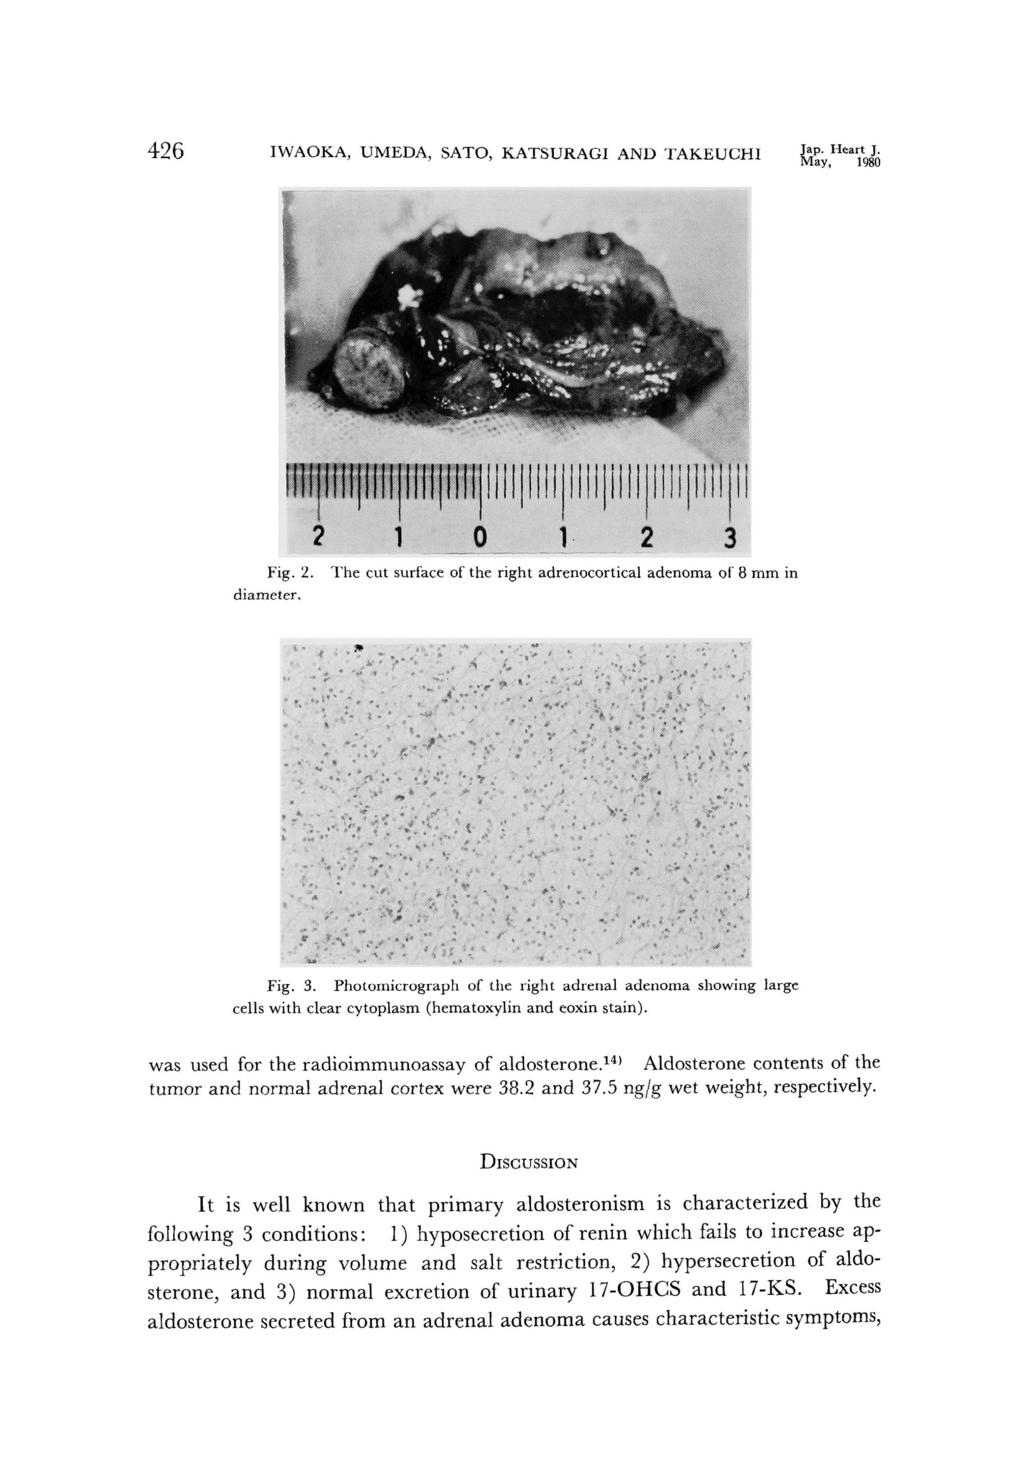 426 IWAOKA, UMEDA, SATO, KATSURAGI AND TAKEUCHI Jap. Heart J. M ay, 1980 Fig. 2. The cut surface of the right adrenocortical adenoma of 8mm in diameter. Fig. 3.